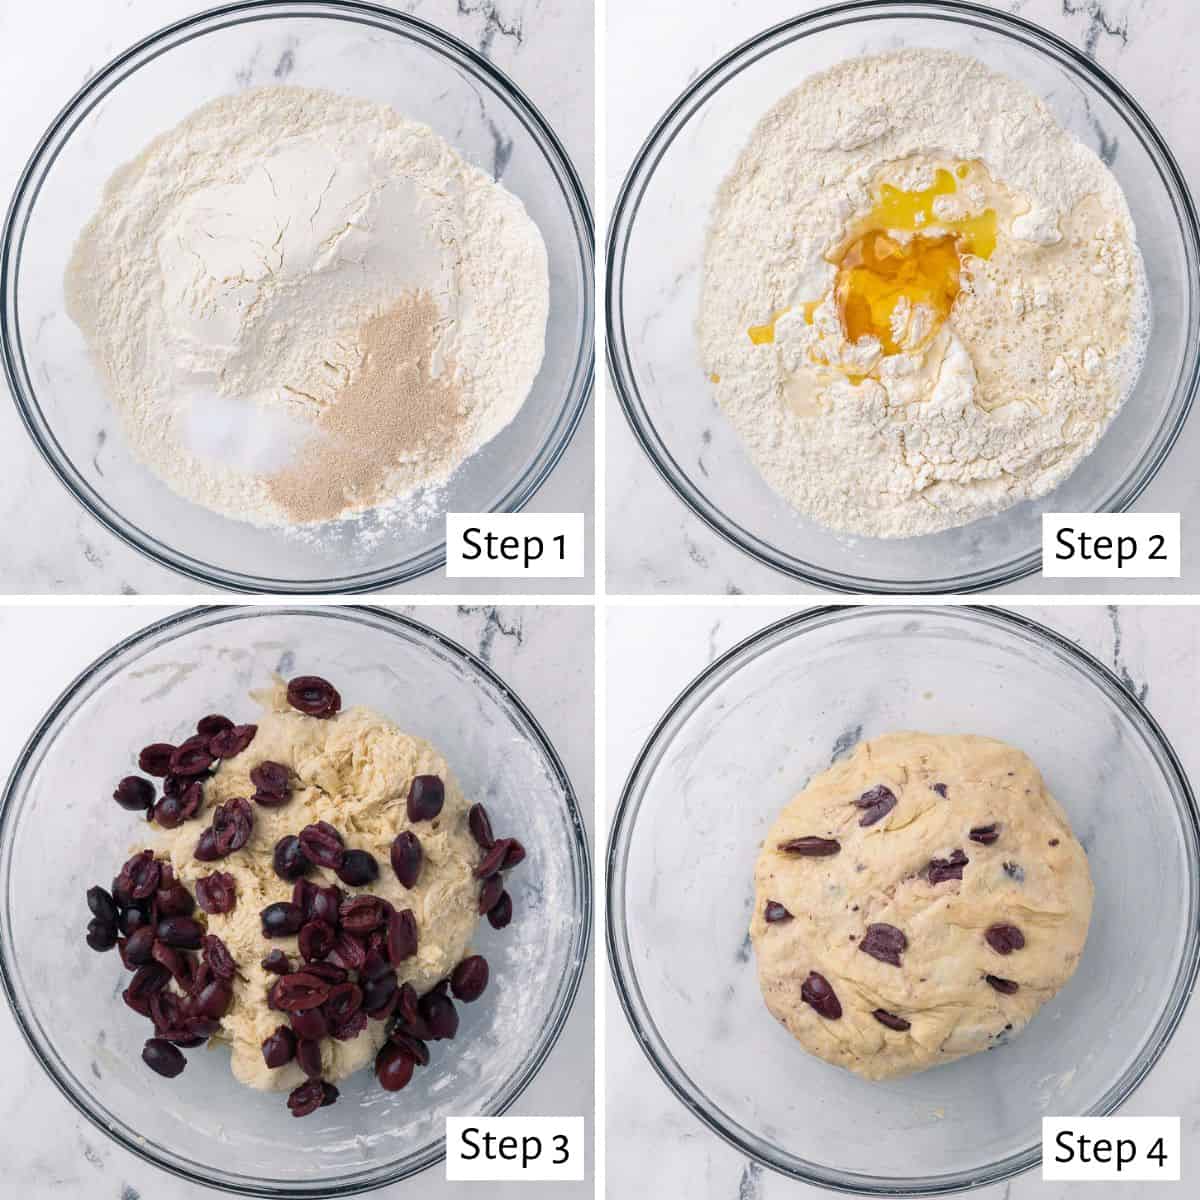 4-image collage making the dough: 1 - Bread flour, yeast, and salt in a bowl; 2 - Warm water, oil, and honey added, before mixing; 3 - After combining until a slightly shaggy, sticky dough forms with chopped olives sprinkled on top; 4 - After olives have been incorporated throughout, in the oiled bowl before the first rise.